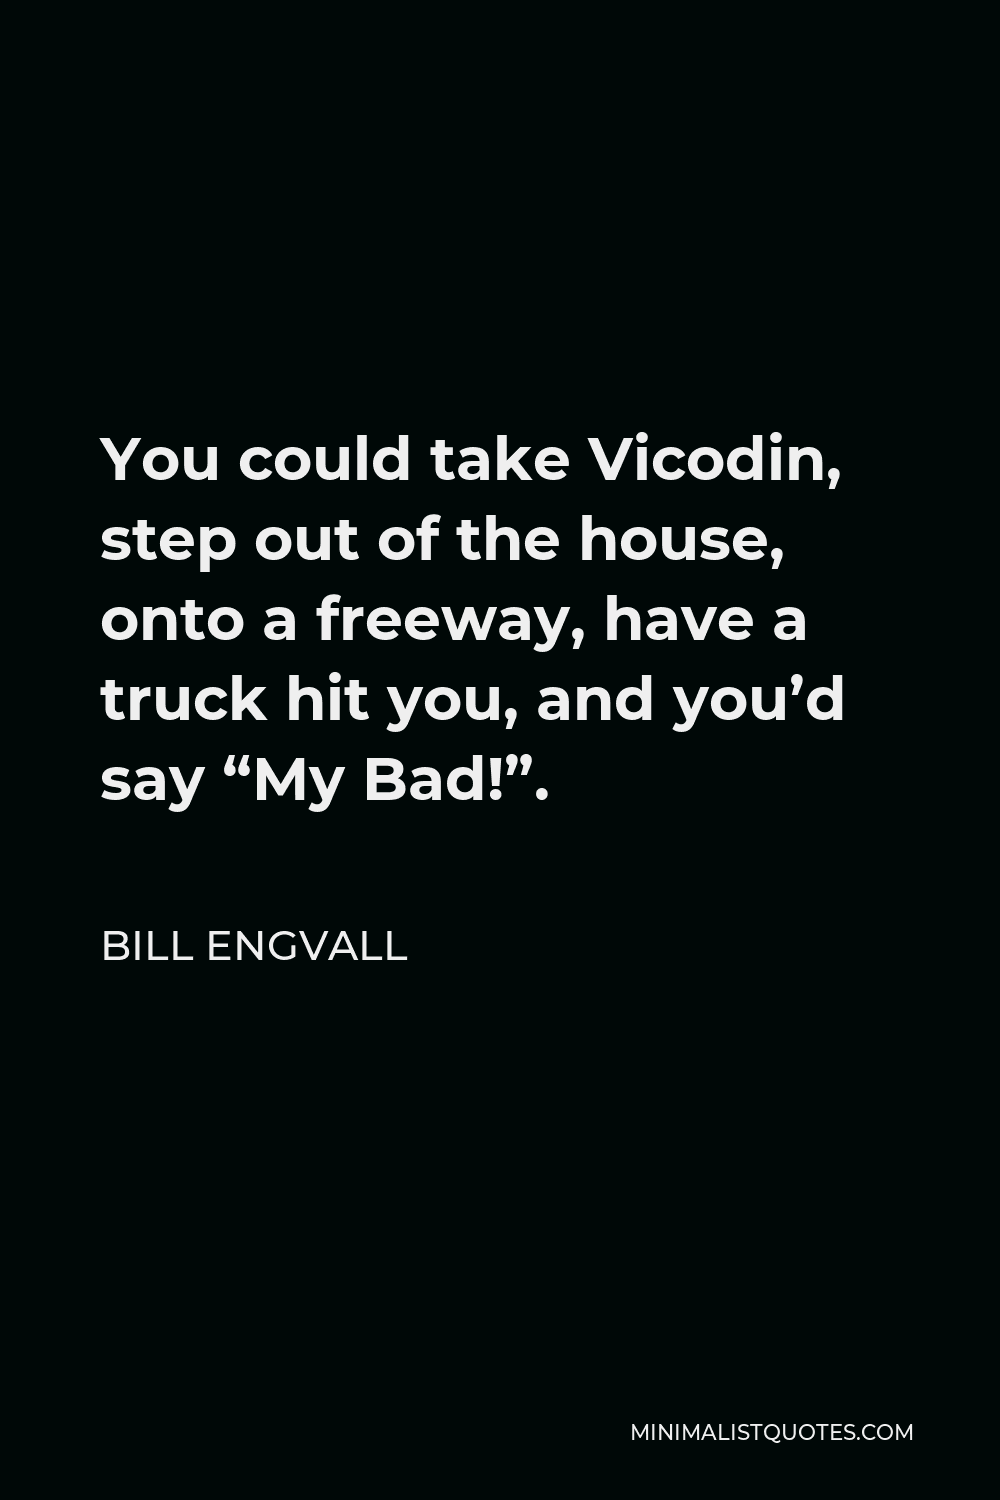 Bill Engvall Quote - You could take Vicodin, step out of the house, onto a freeway, have a truck hit you, and you’d say “My Bad!”.